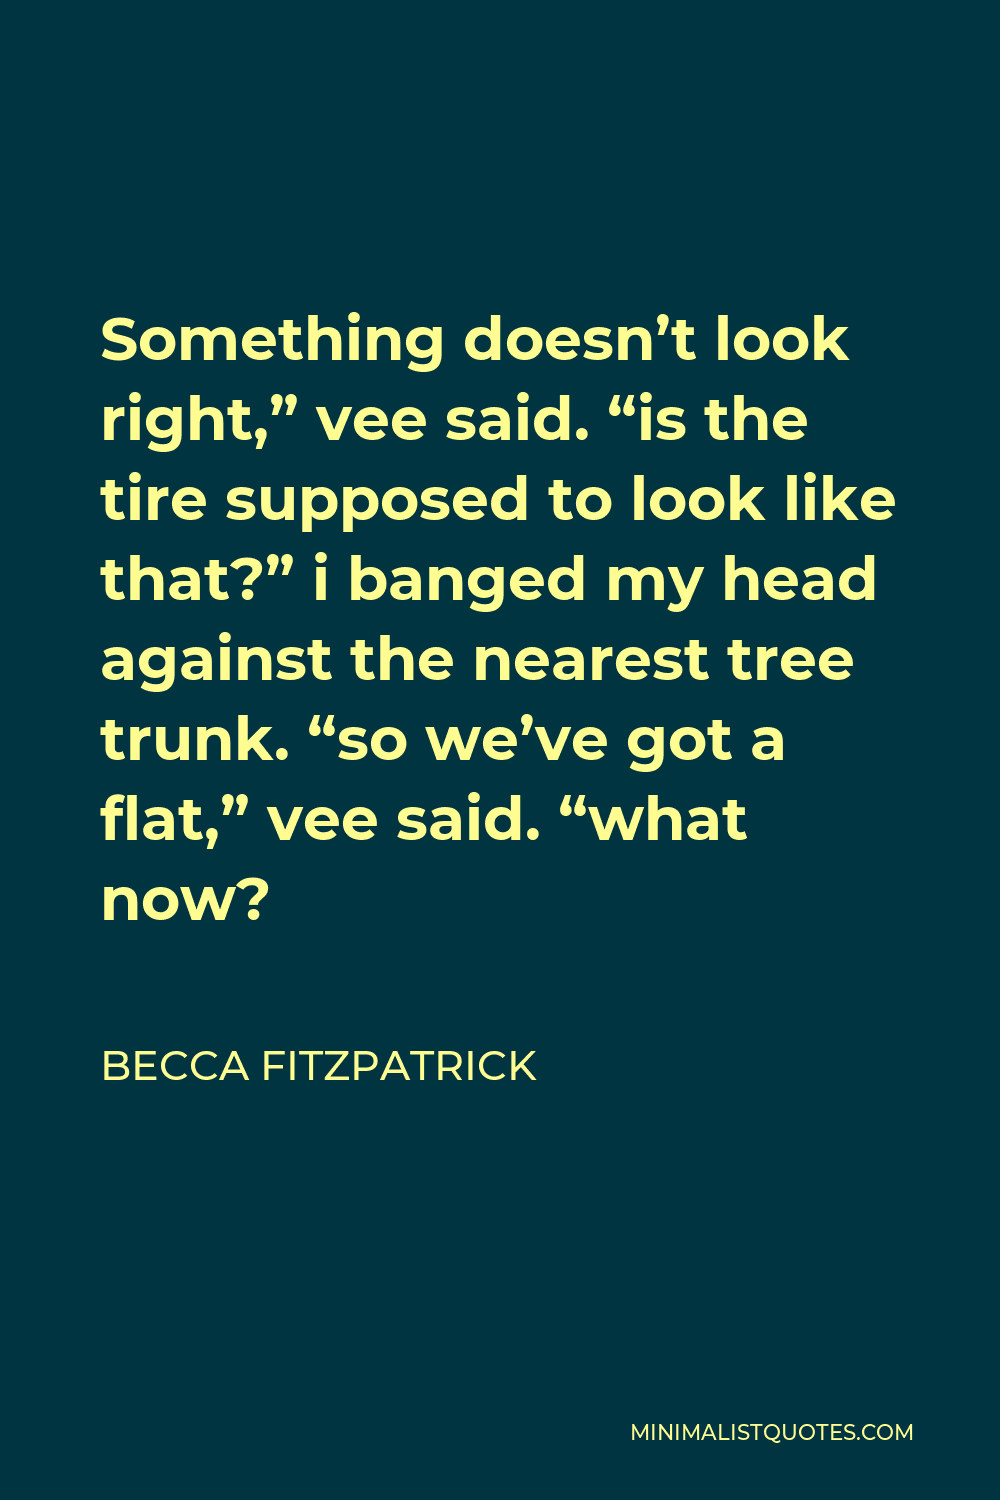 Becca Fitzpatrick Quote - Something doesn’t look right,” vee said. “is the tire supposed to look like that?” i banged my head against the nearest tree trunk. “so we’ve got a flat,” vee said. “what now?